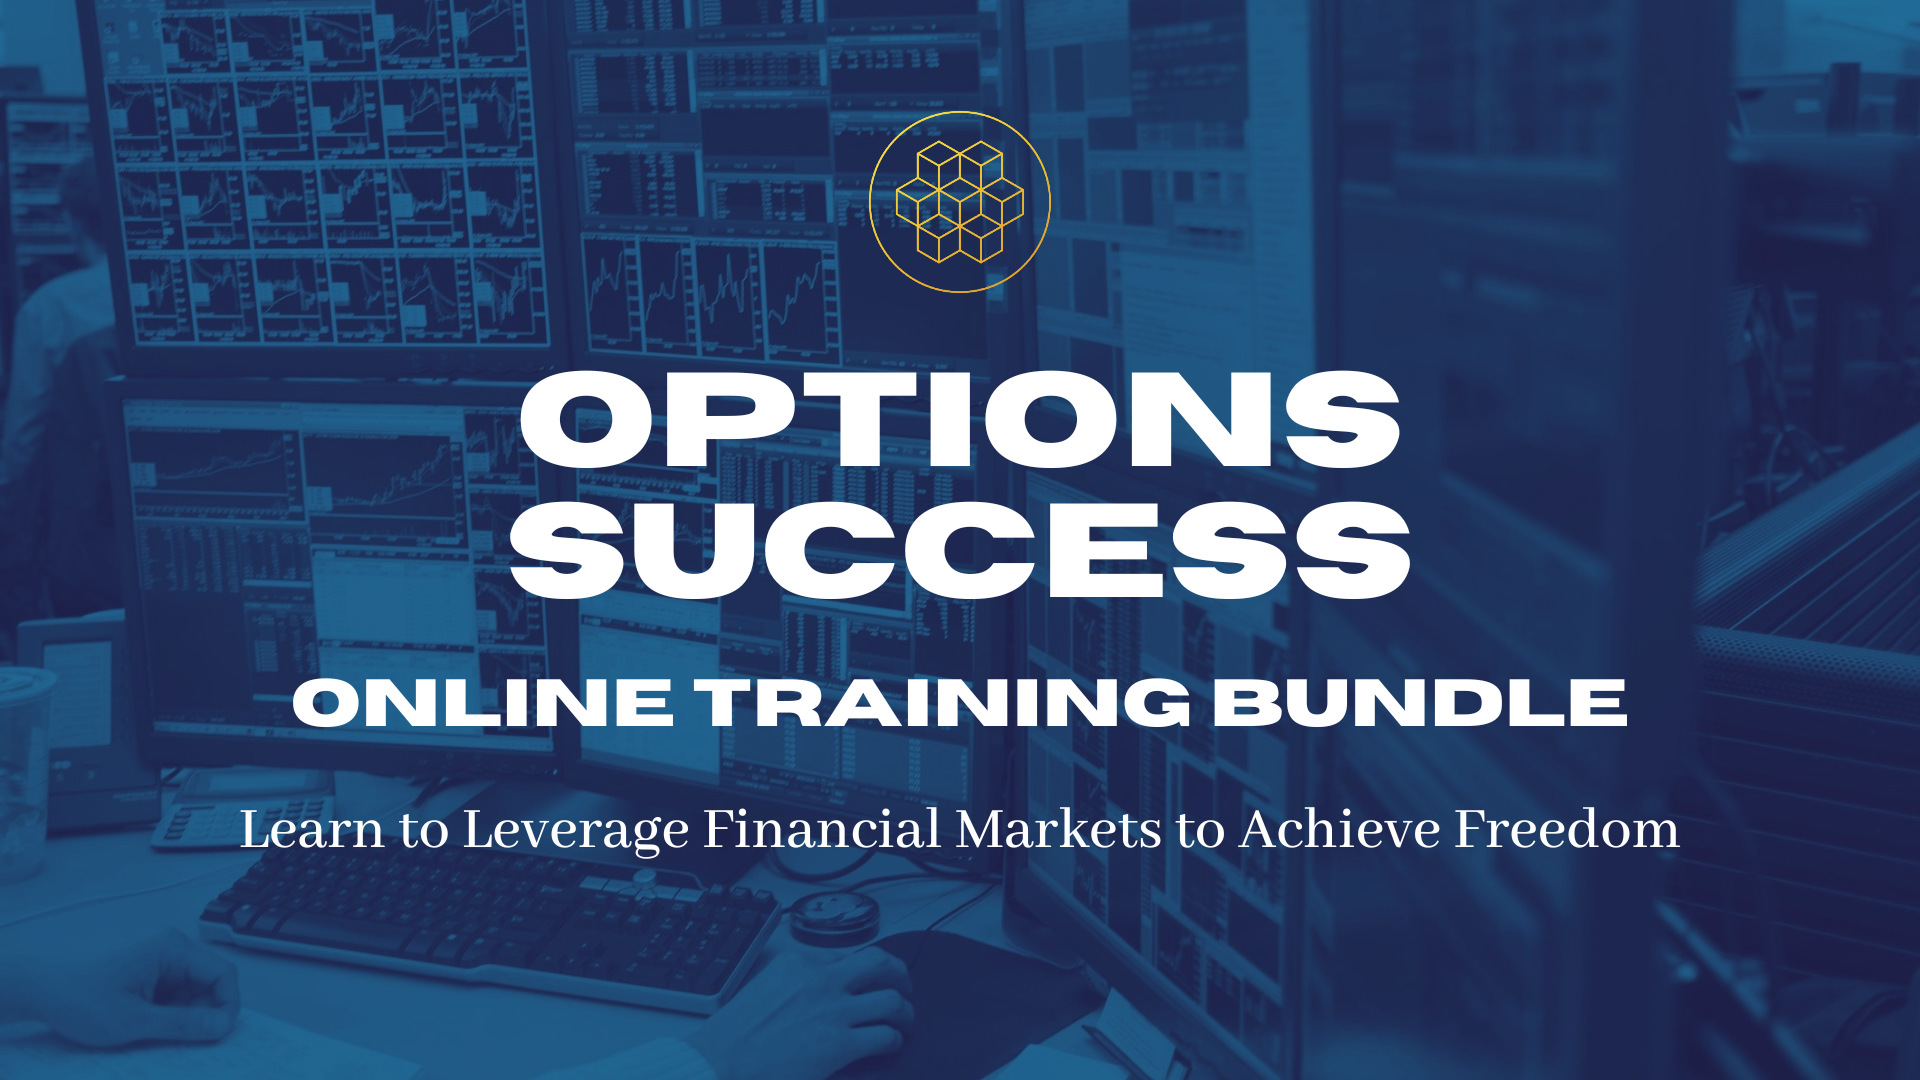 Get (Honest & Affordable) Financial Education Today with the Options Success Training Bundle.